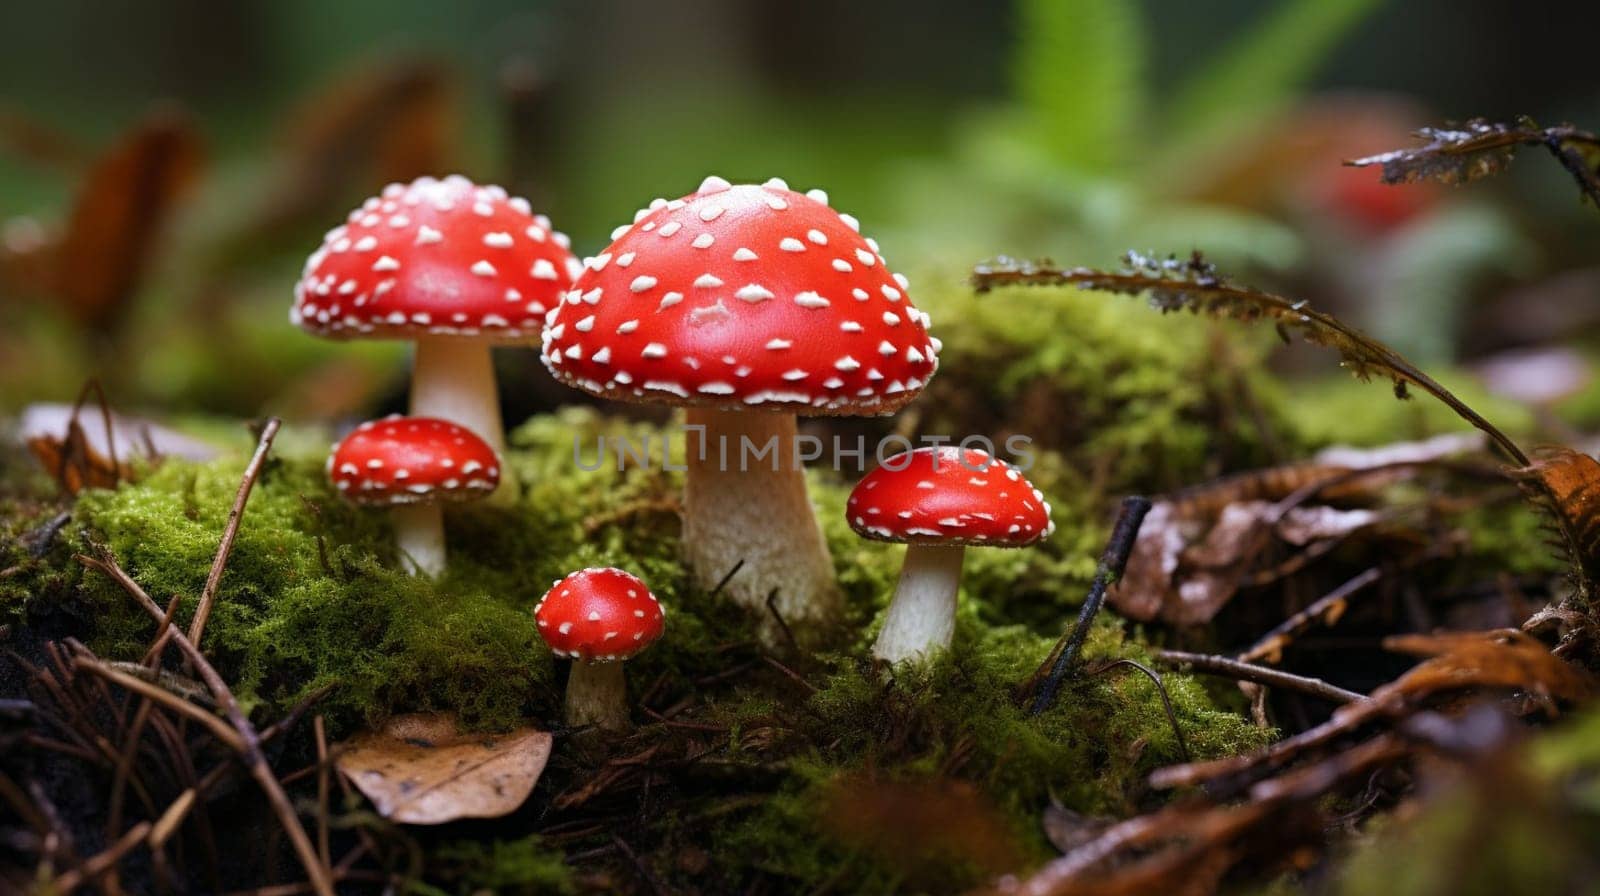 A cluster of red mushrooms sprouts among the moss in the natural environment by kizuneko